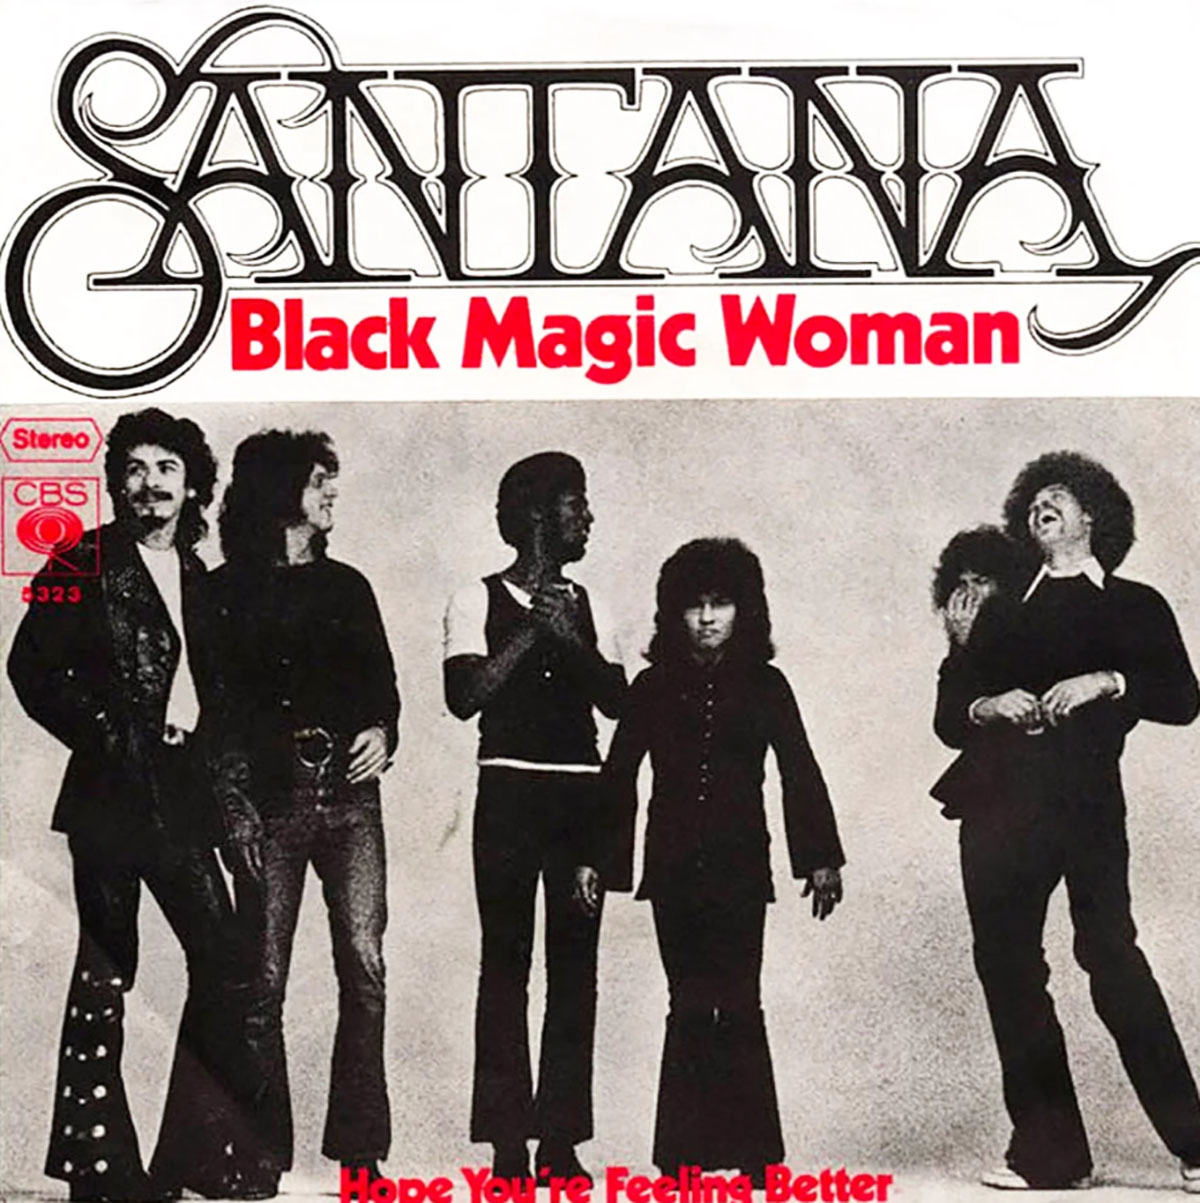 Singles from the Abraxas album: "Black Magic Woman" - A-side and "Hope You're Feeling Better" - B-side